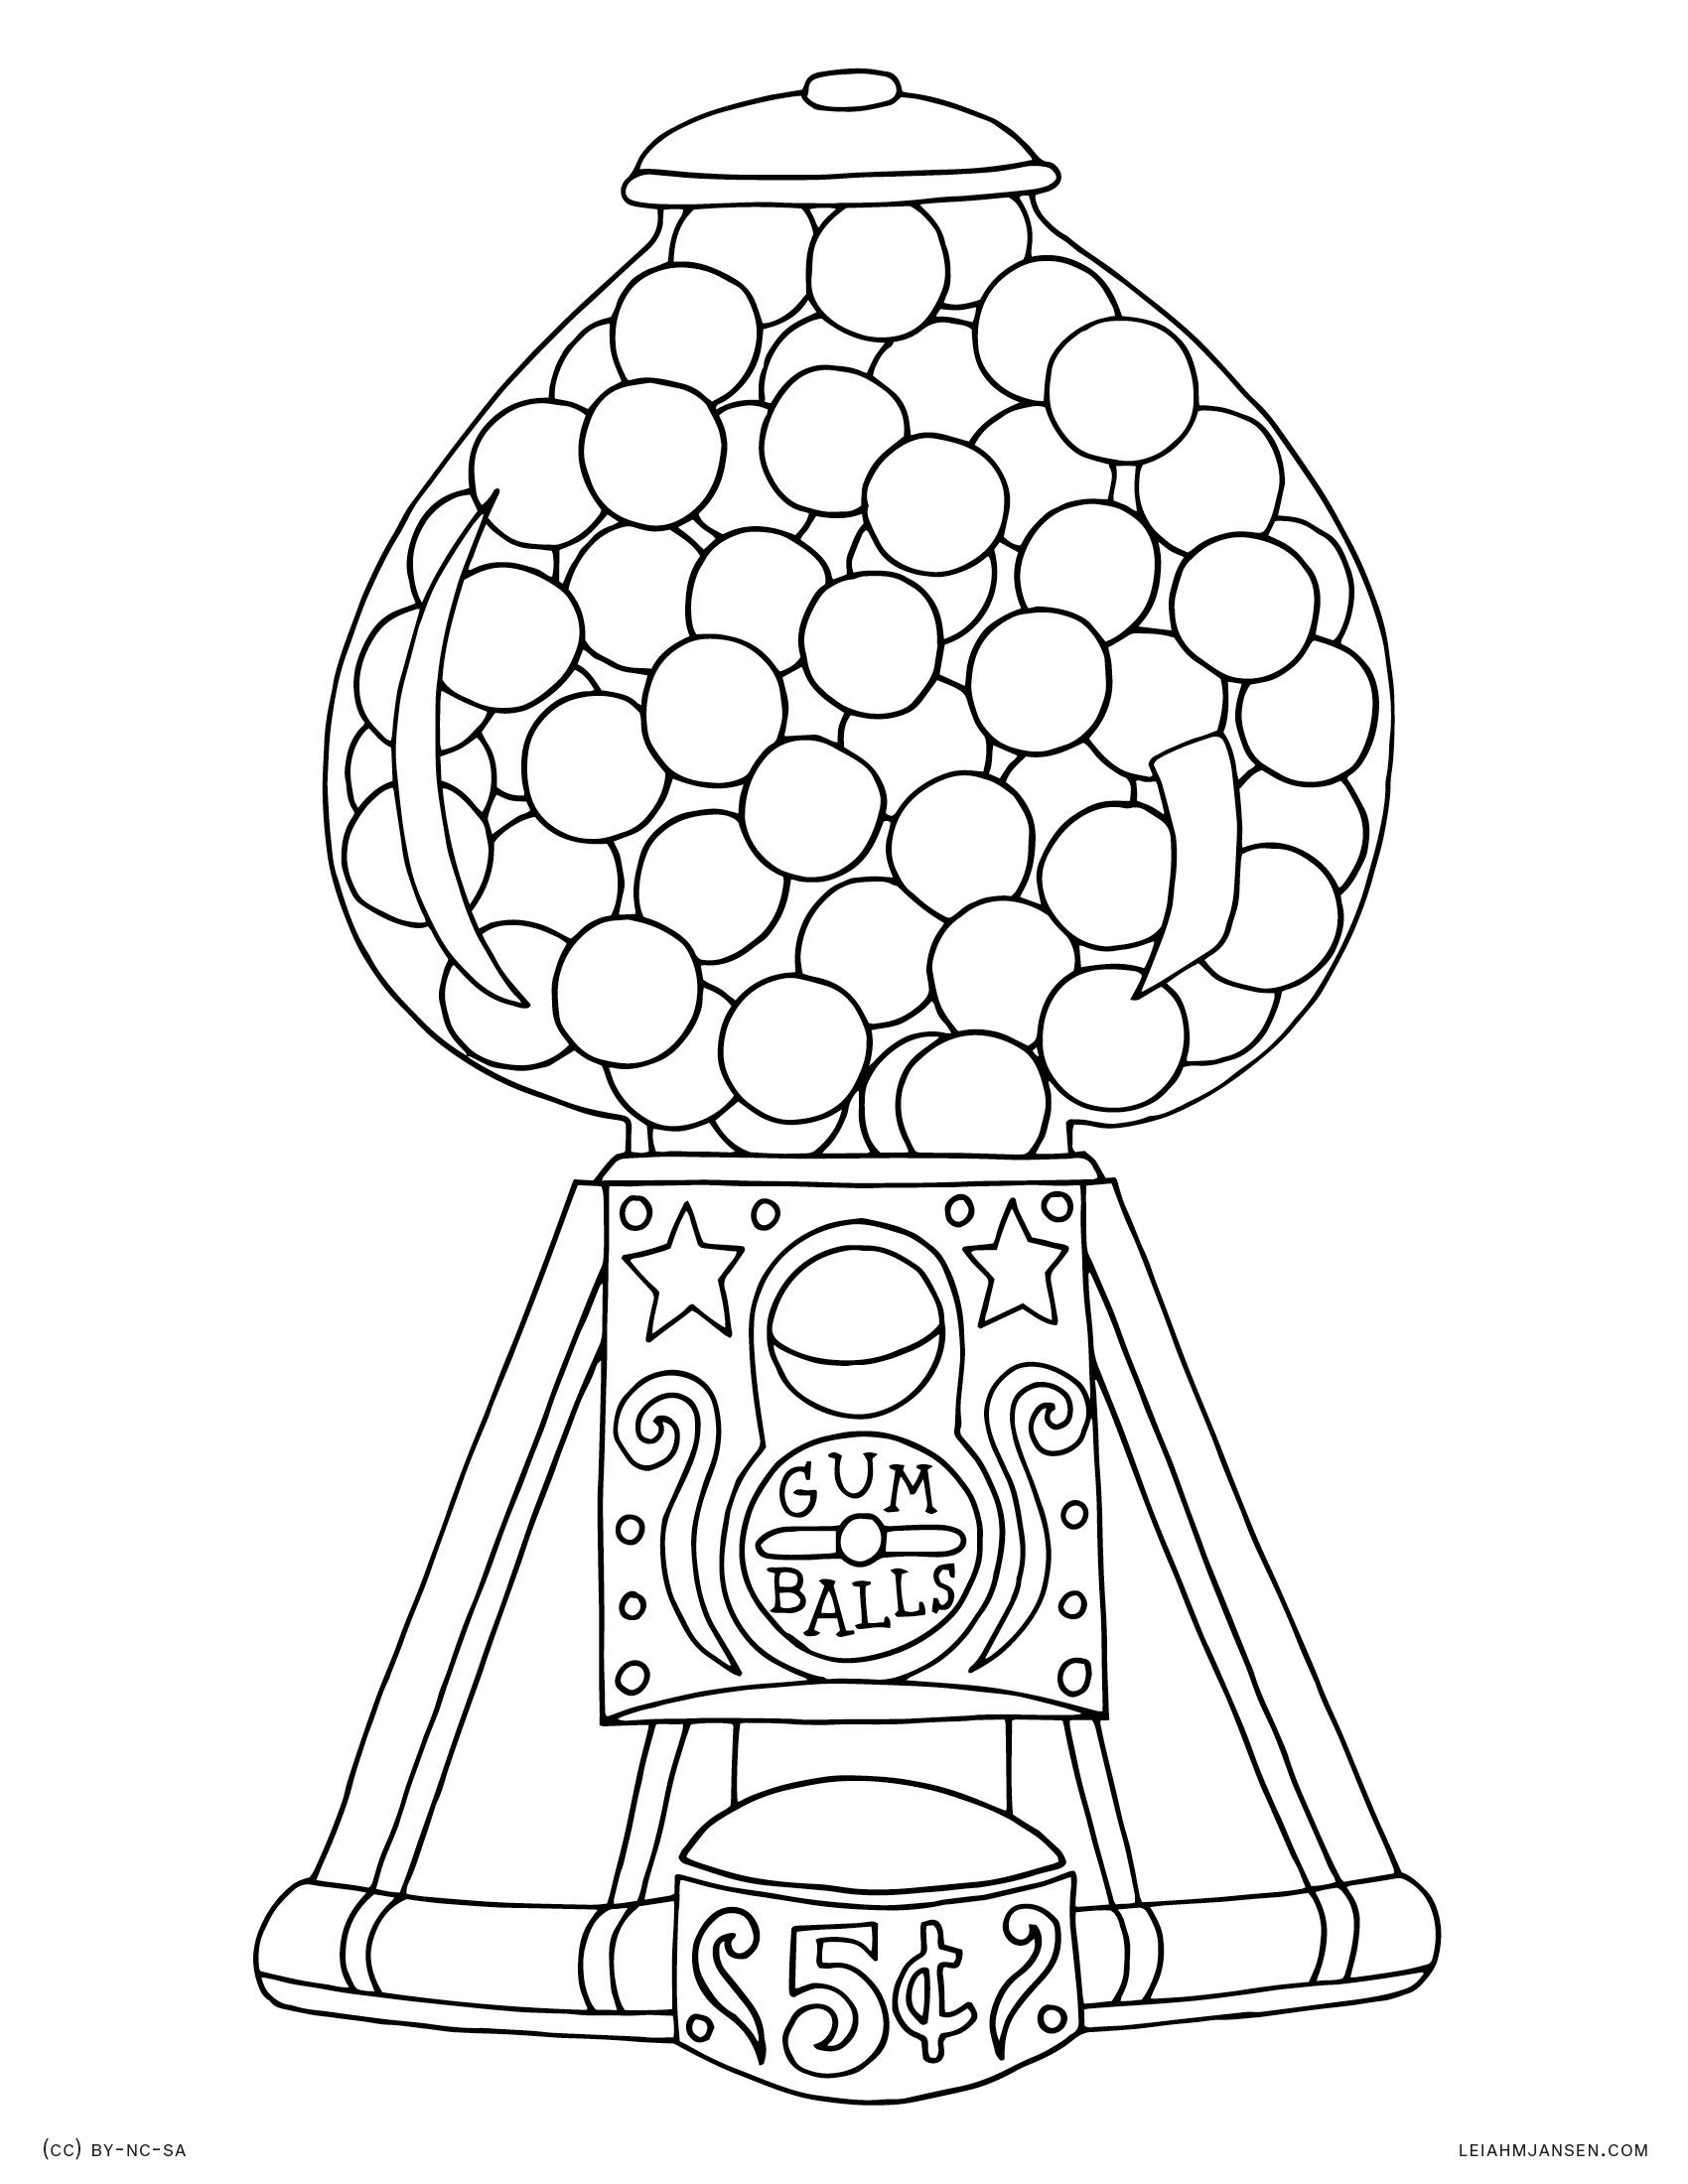 Gumball Machine Template Sketch Coloring Page